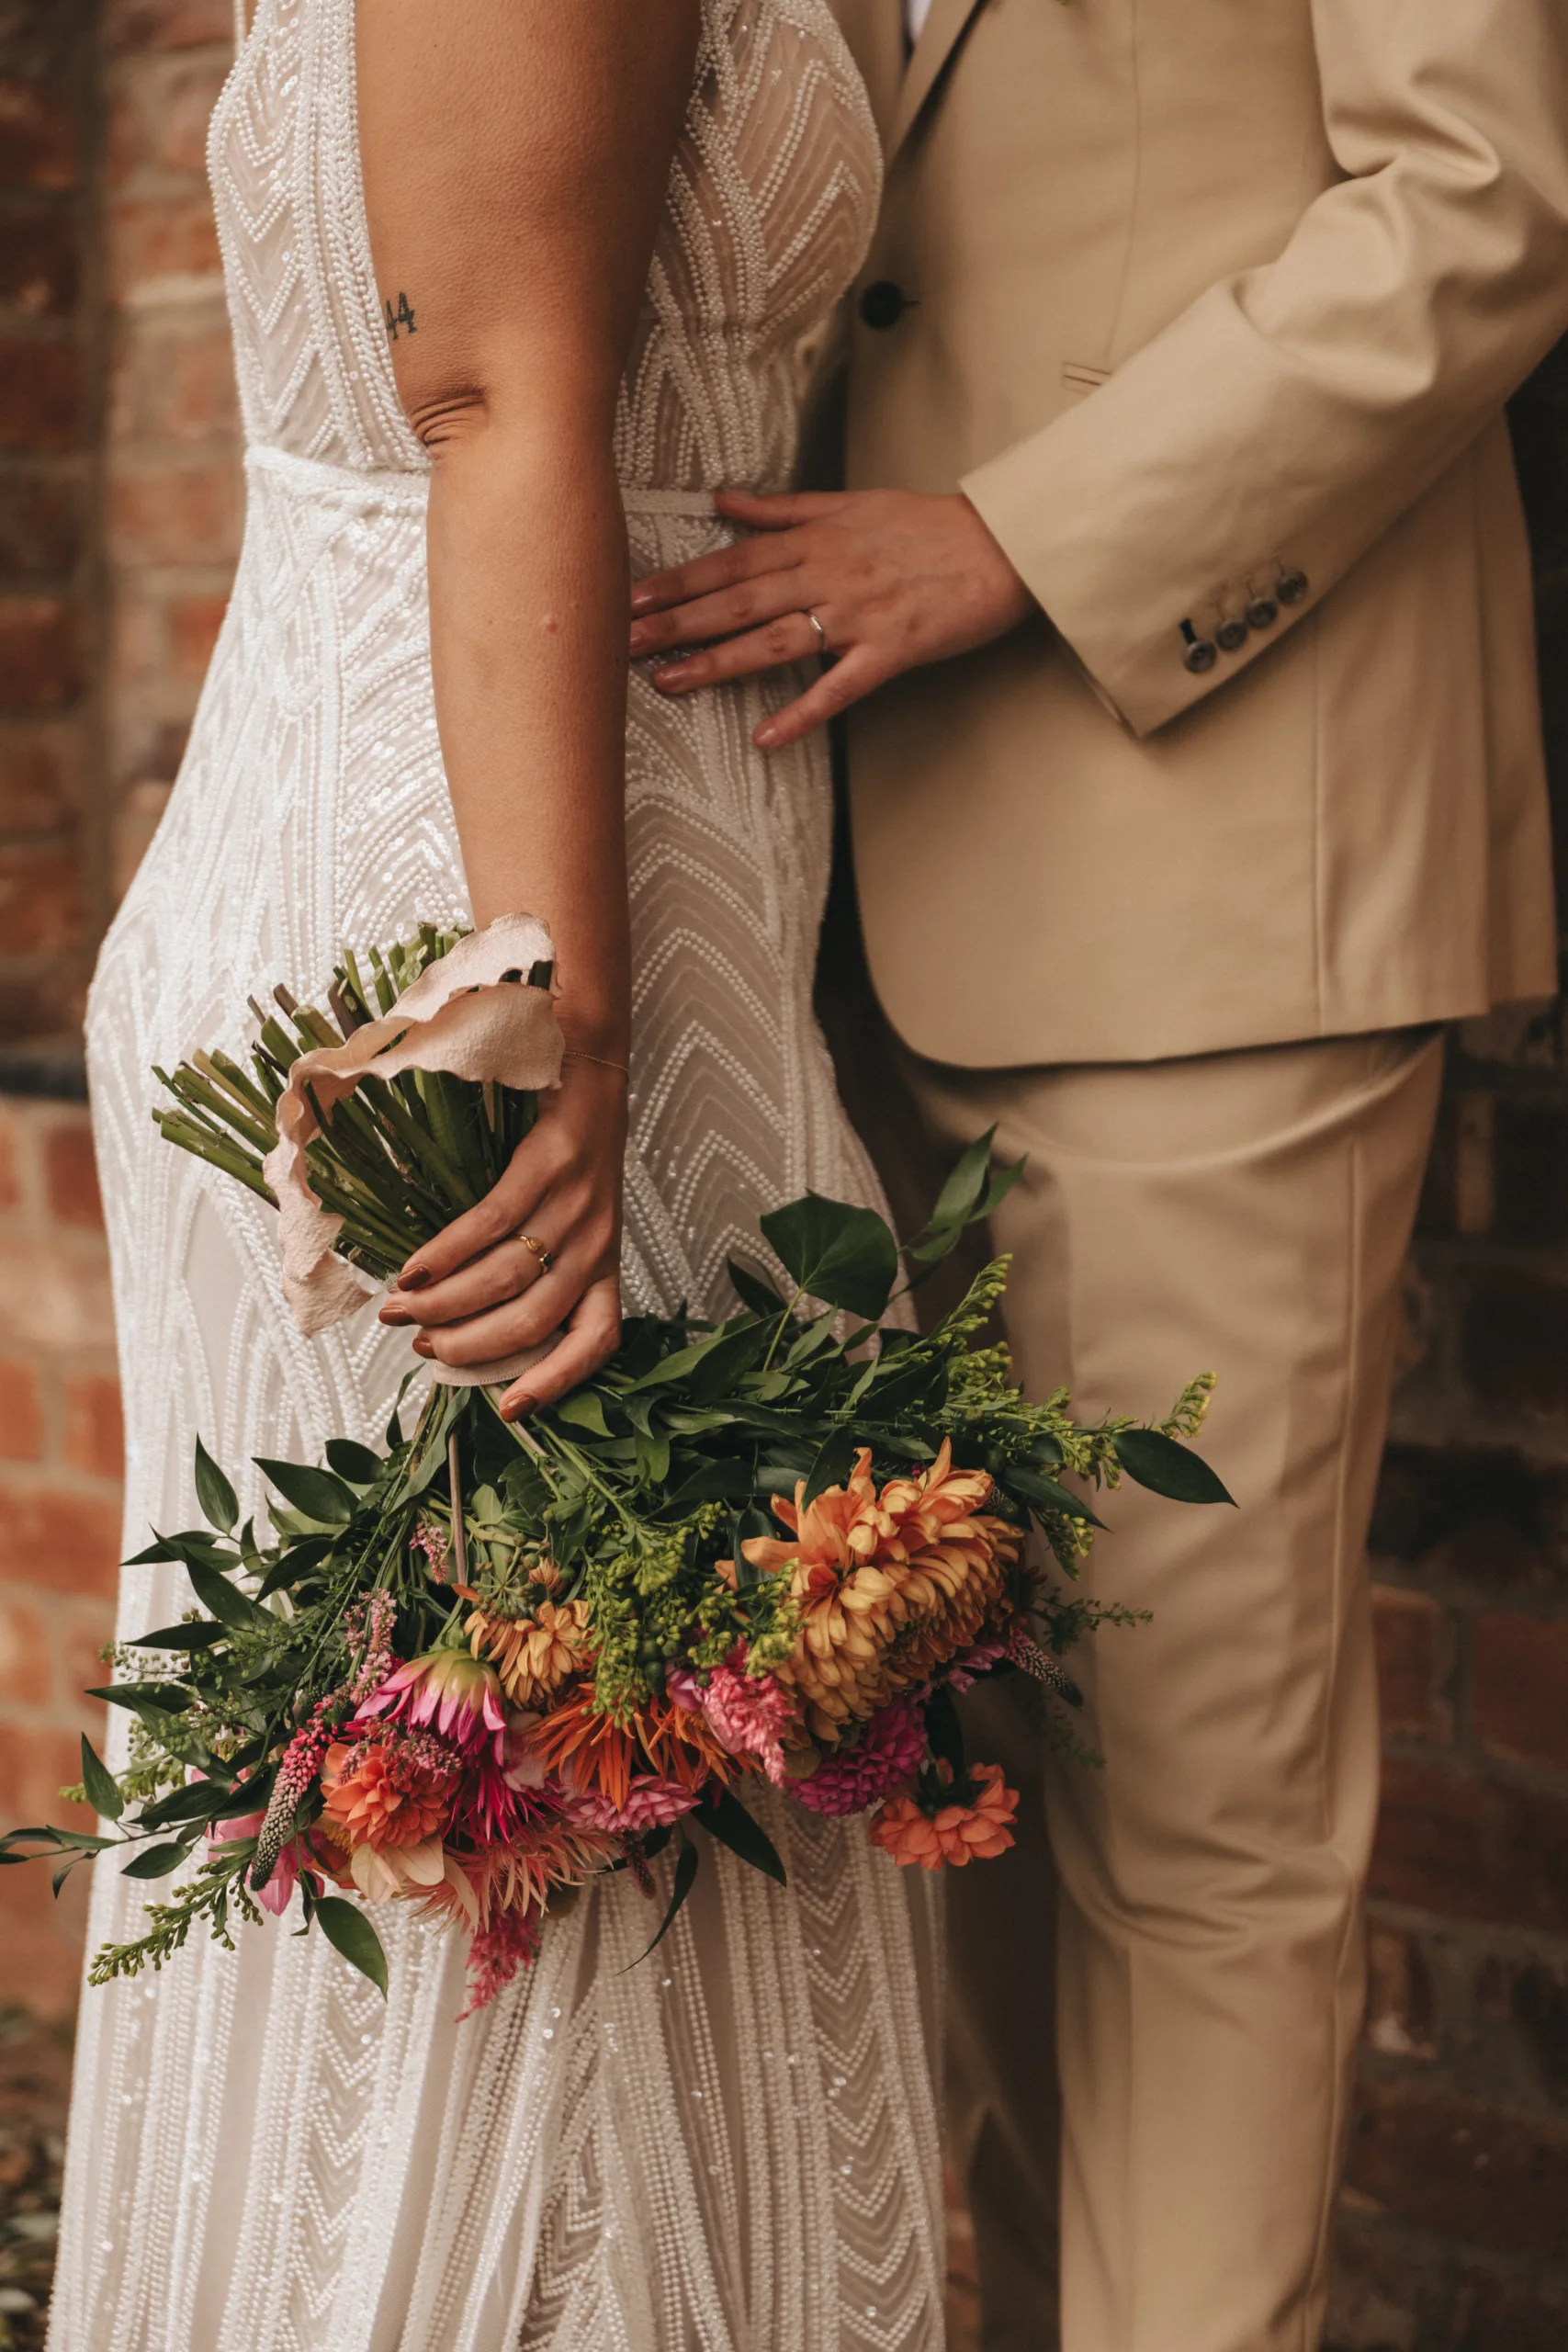 A bride and groom holding a bouquet in front of a brick wall at their Lincolnshire wedding. With photography capturing this special moment.